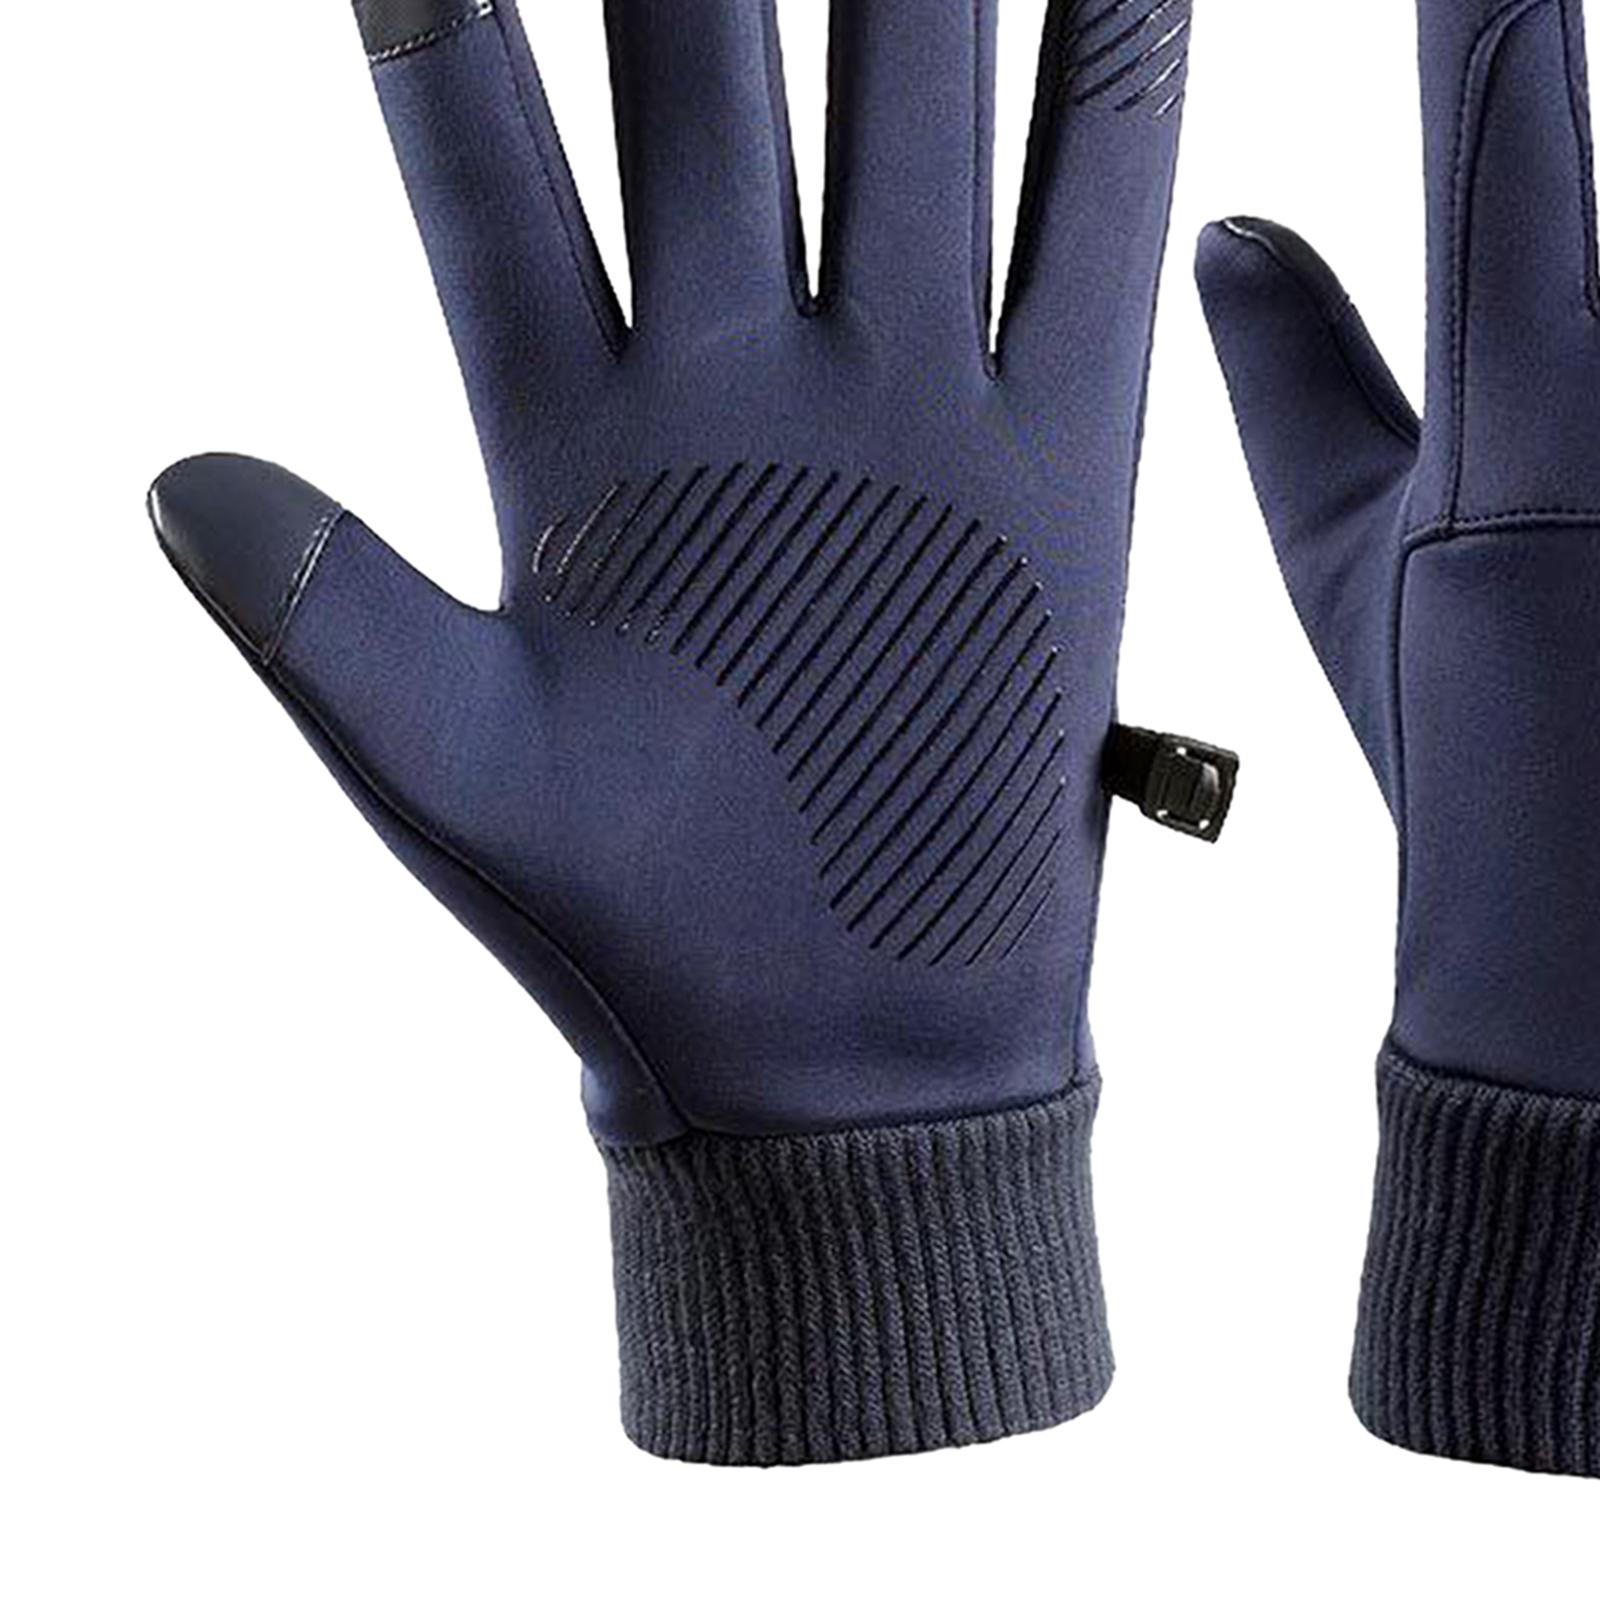 Winter Outdoor Cycling Hiking Sports Gloves Touch Screen L Navy Blue K147